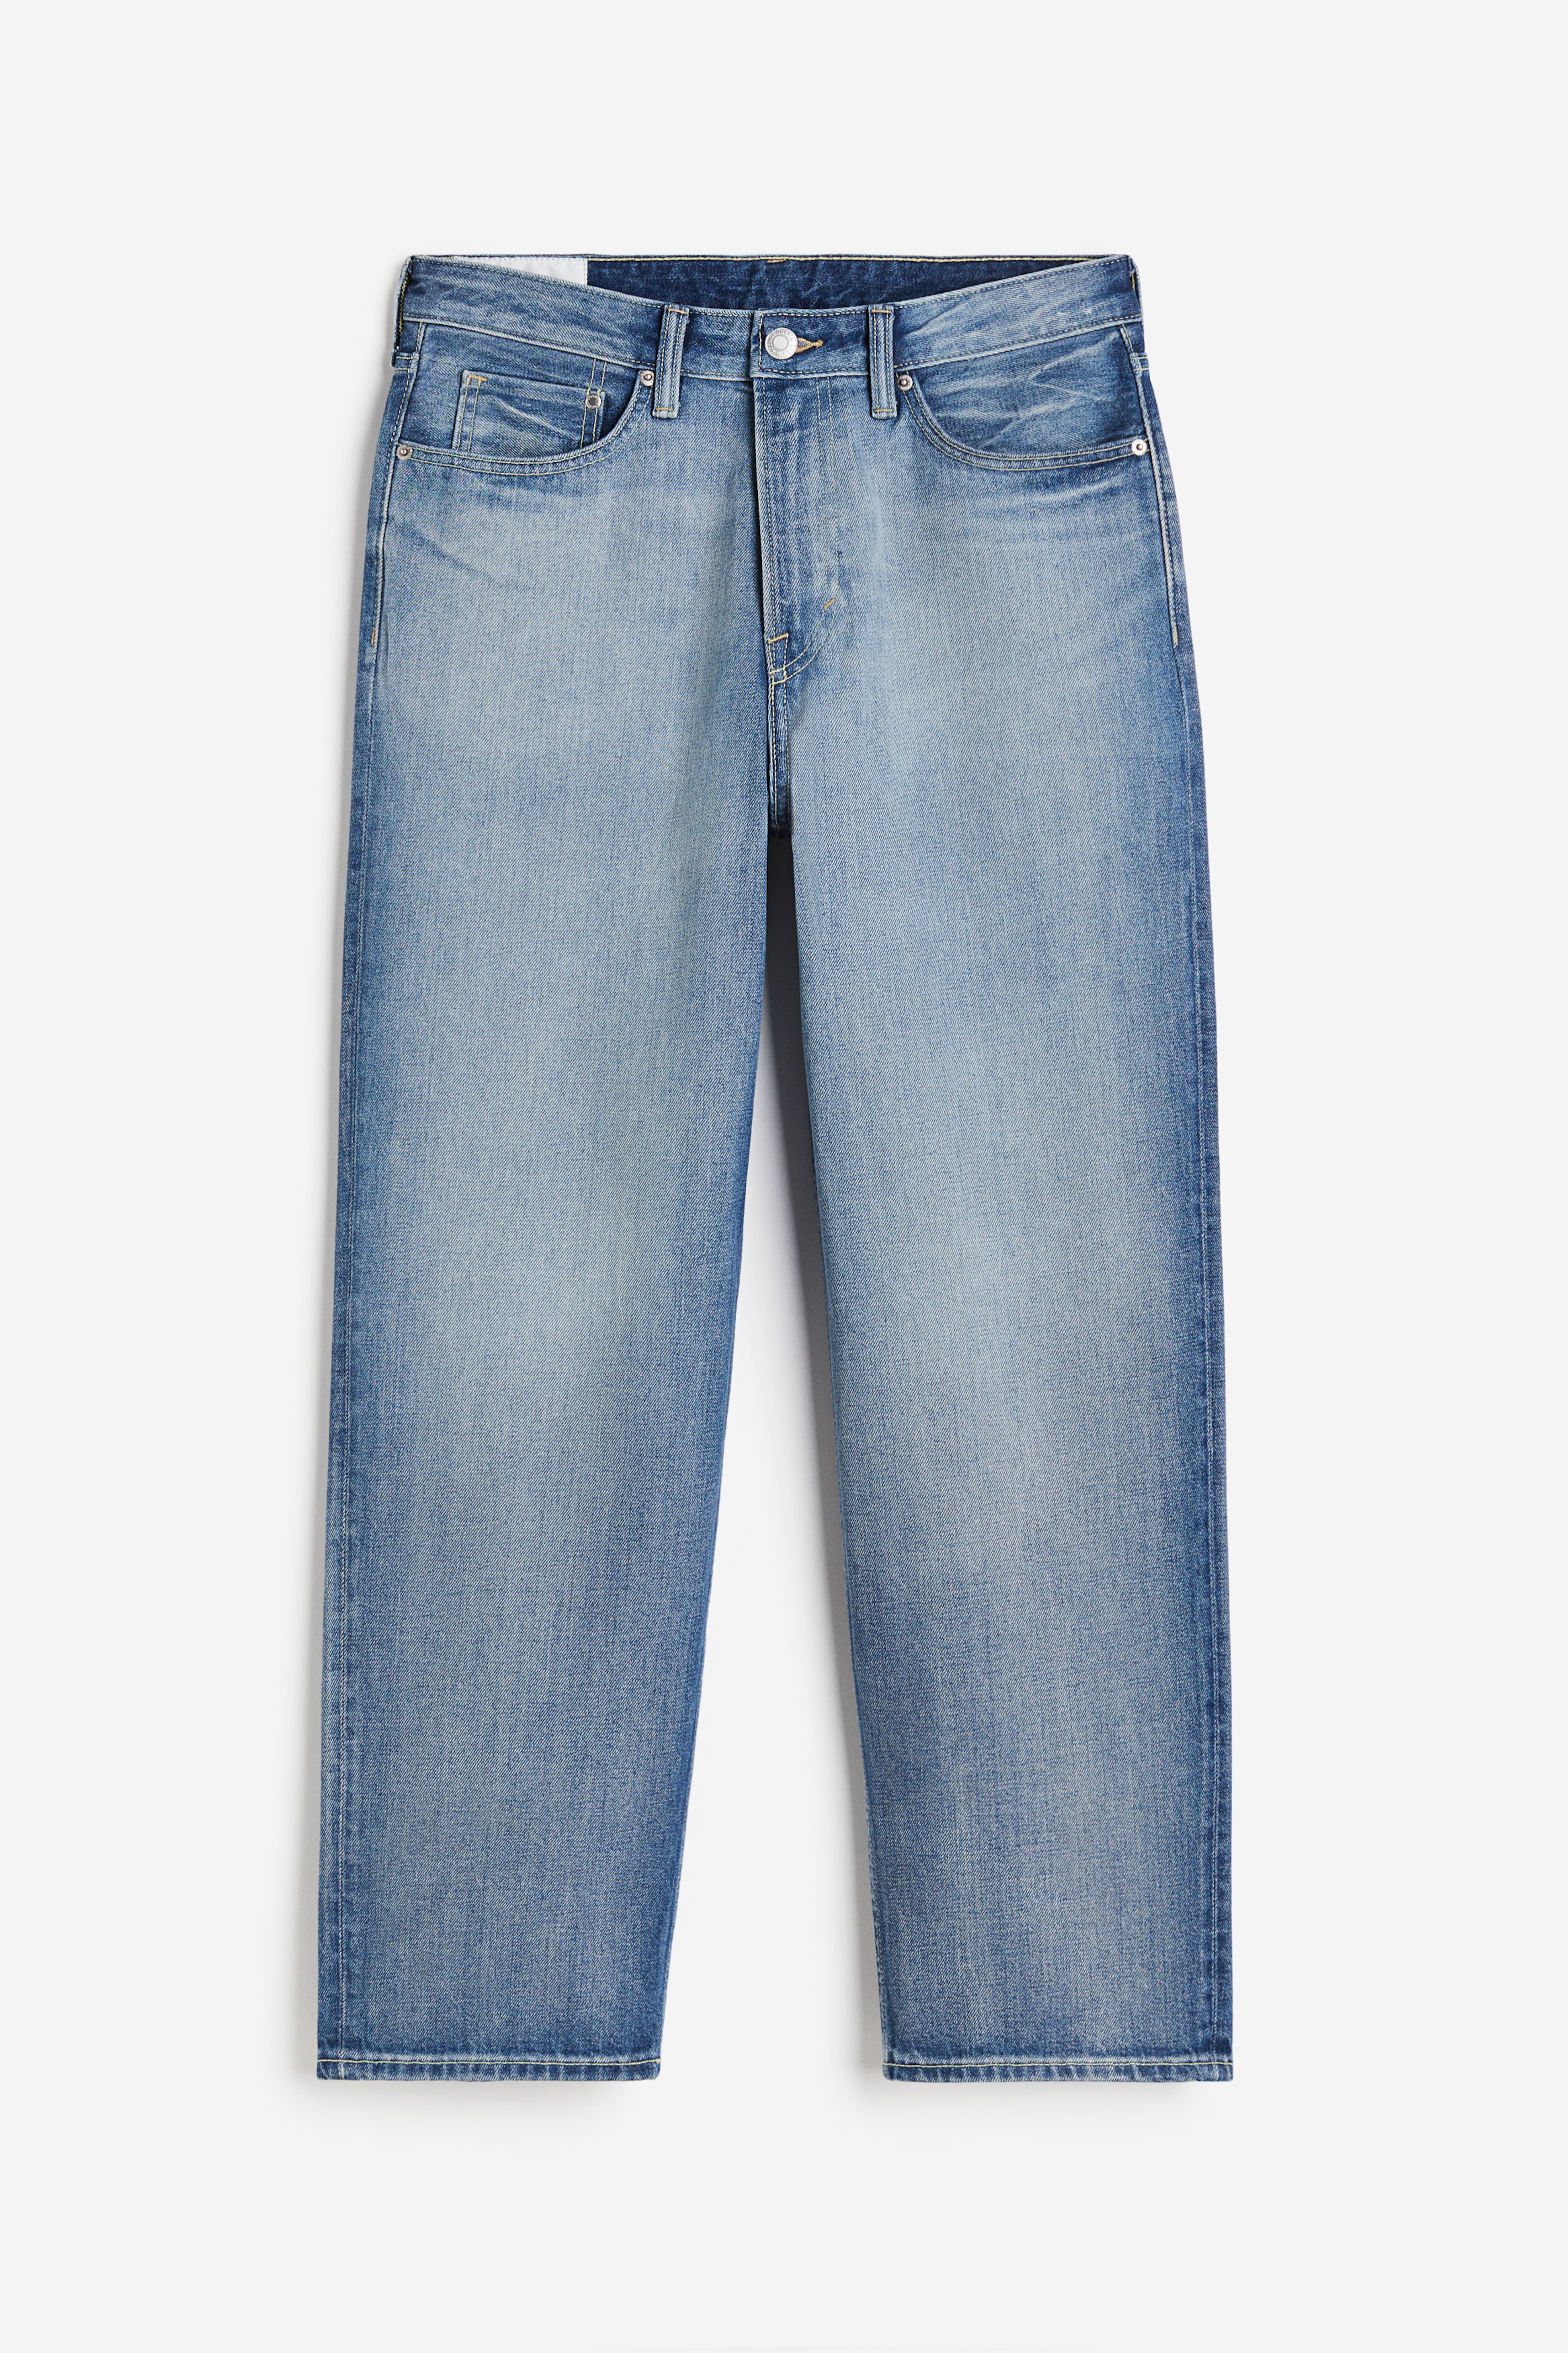 Men's Jeans | Baggy Slim Fit Ripped & Skinny Jeans | H&M US